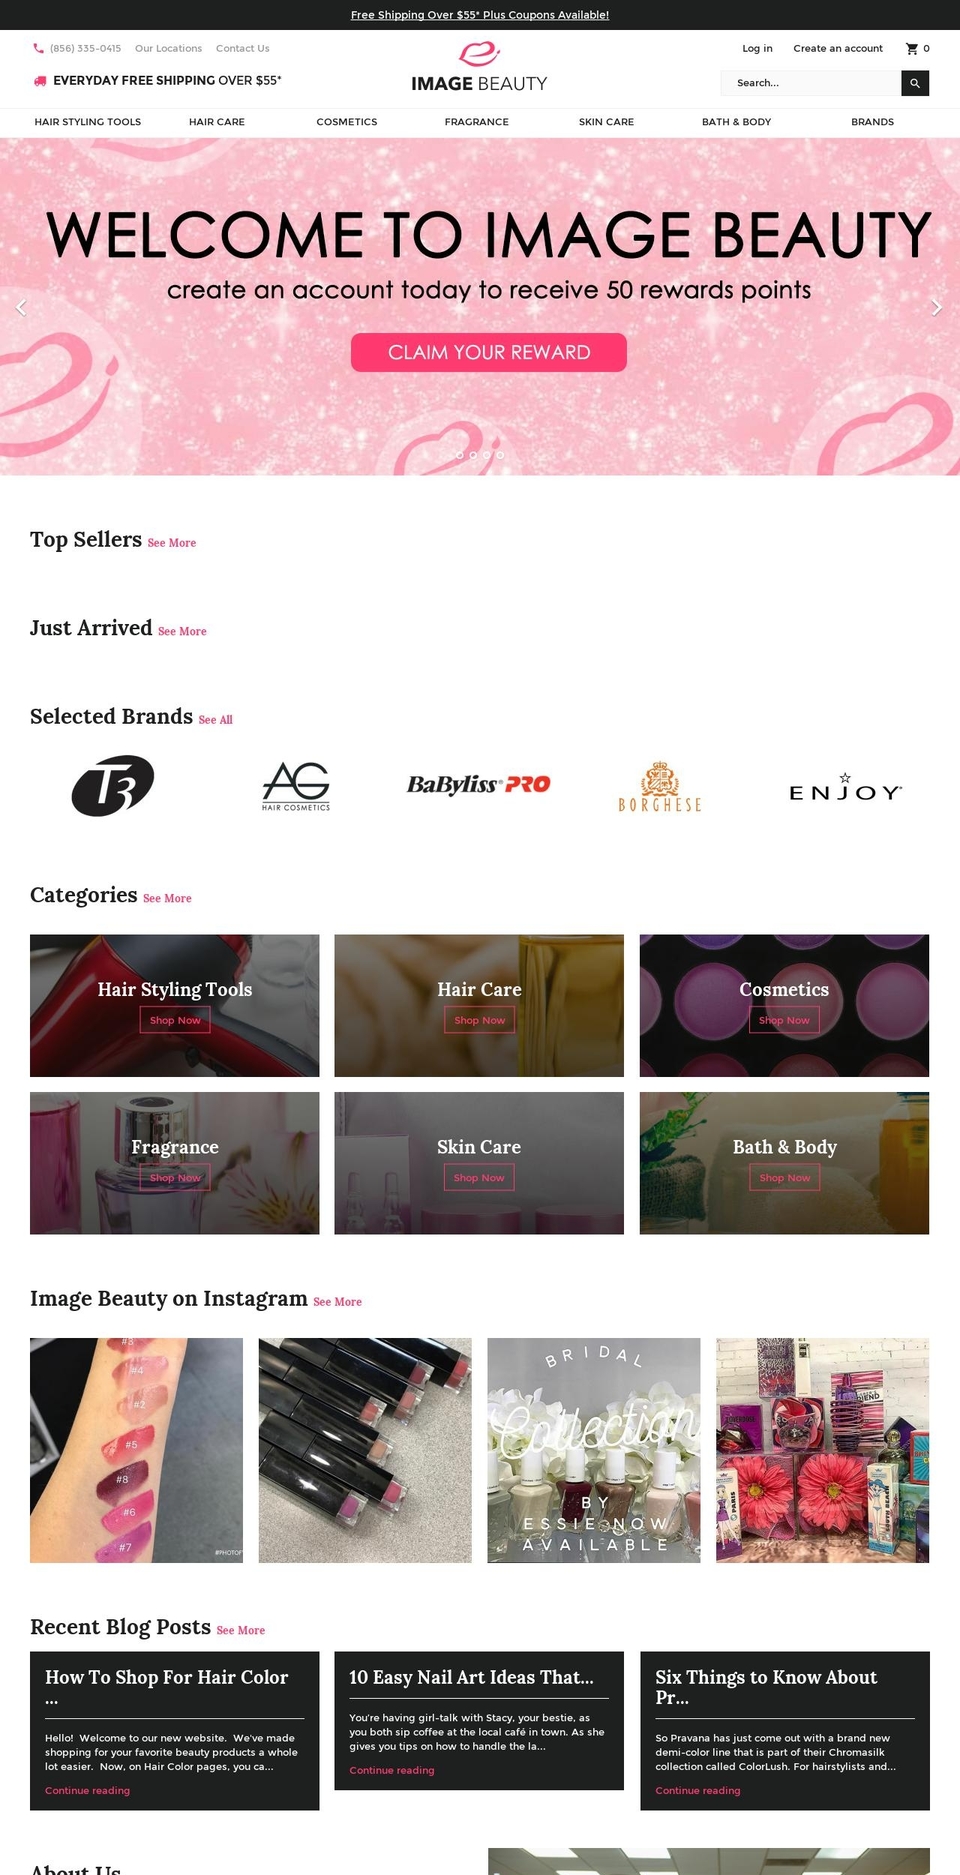 Label Shopify theme site example discountbeautycenter.com